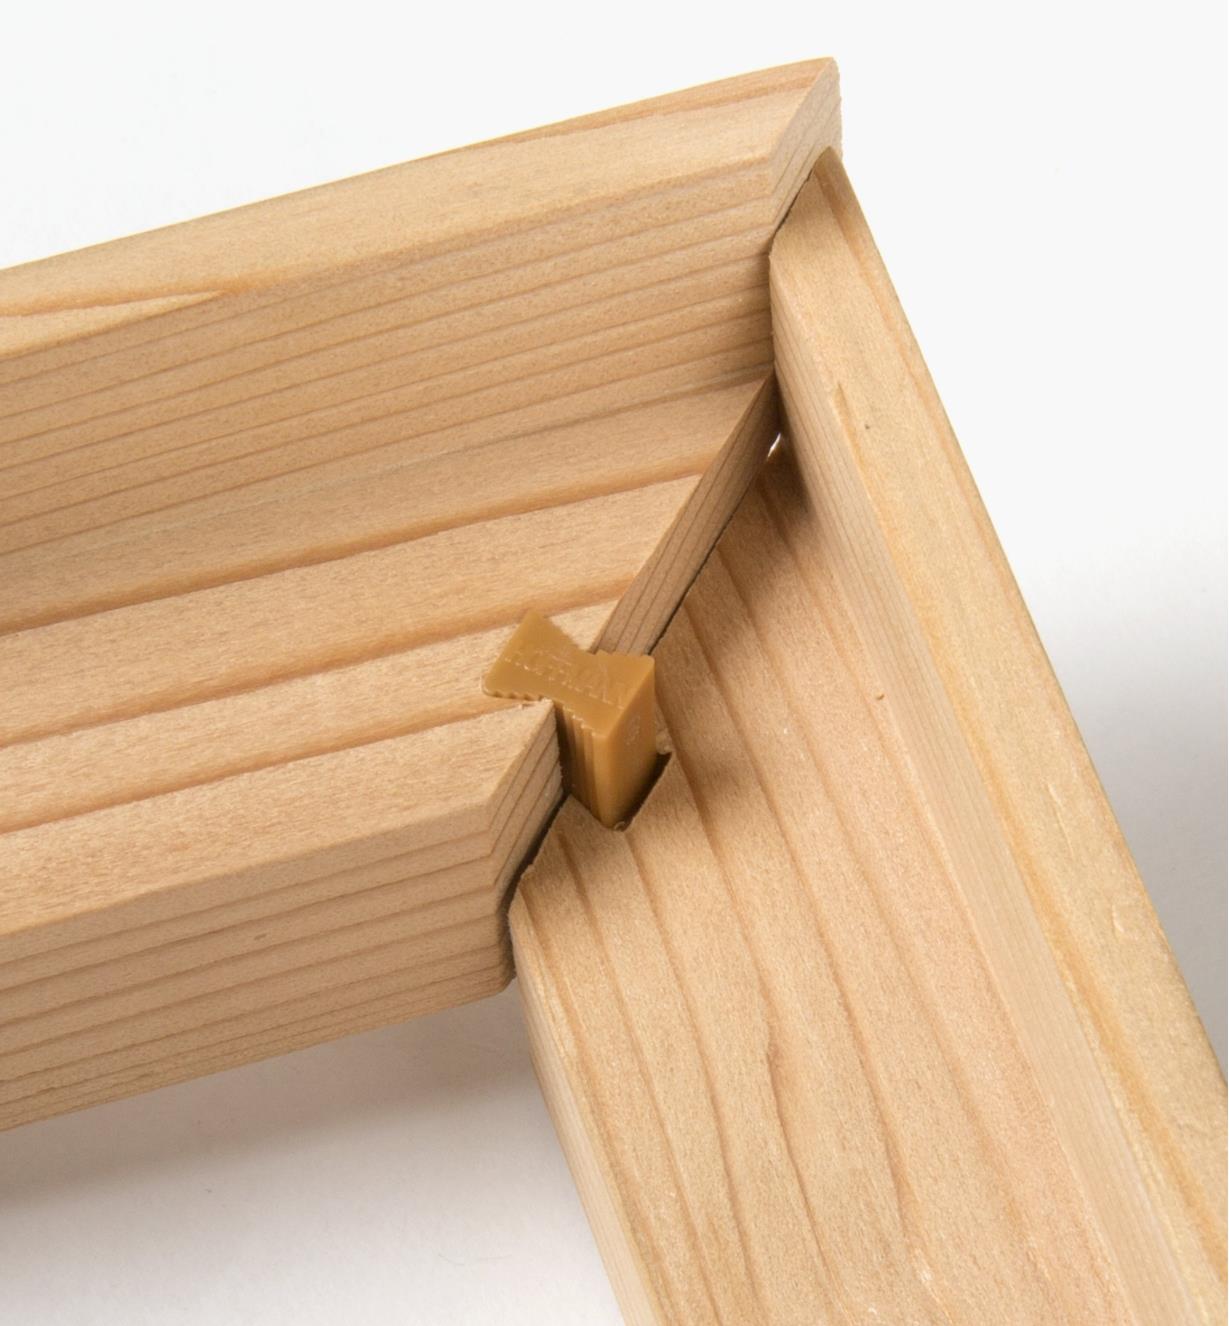 Close-up of two mitered skirt pieces being joined with a corner connector